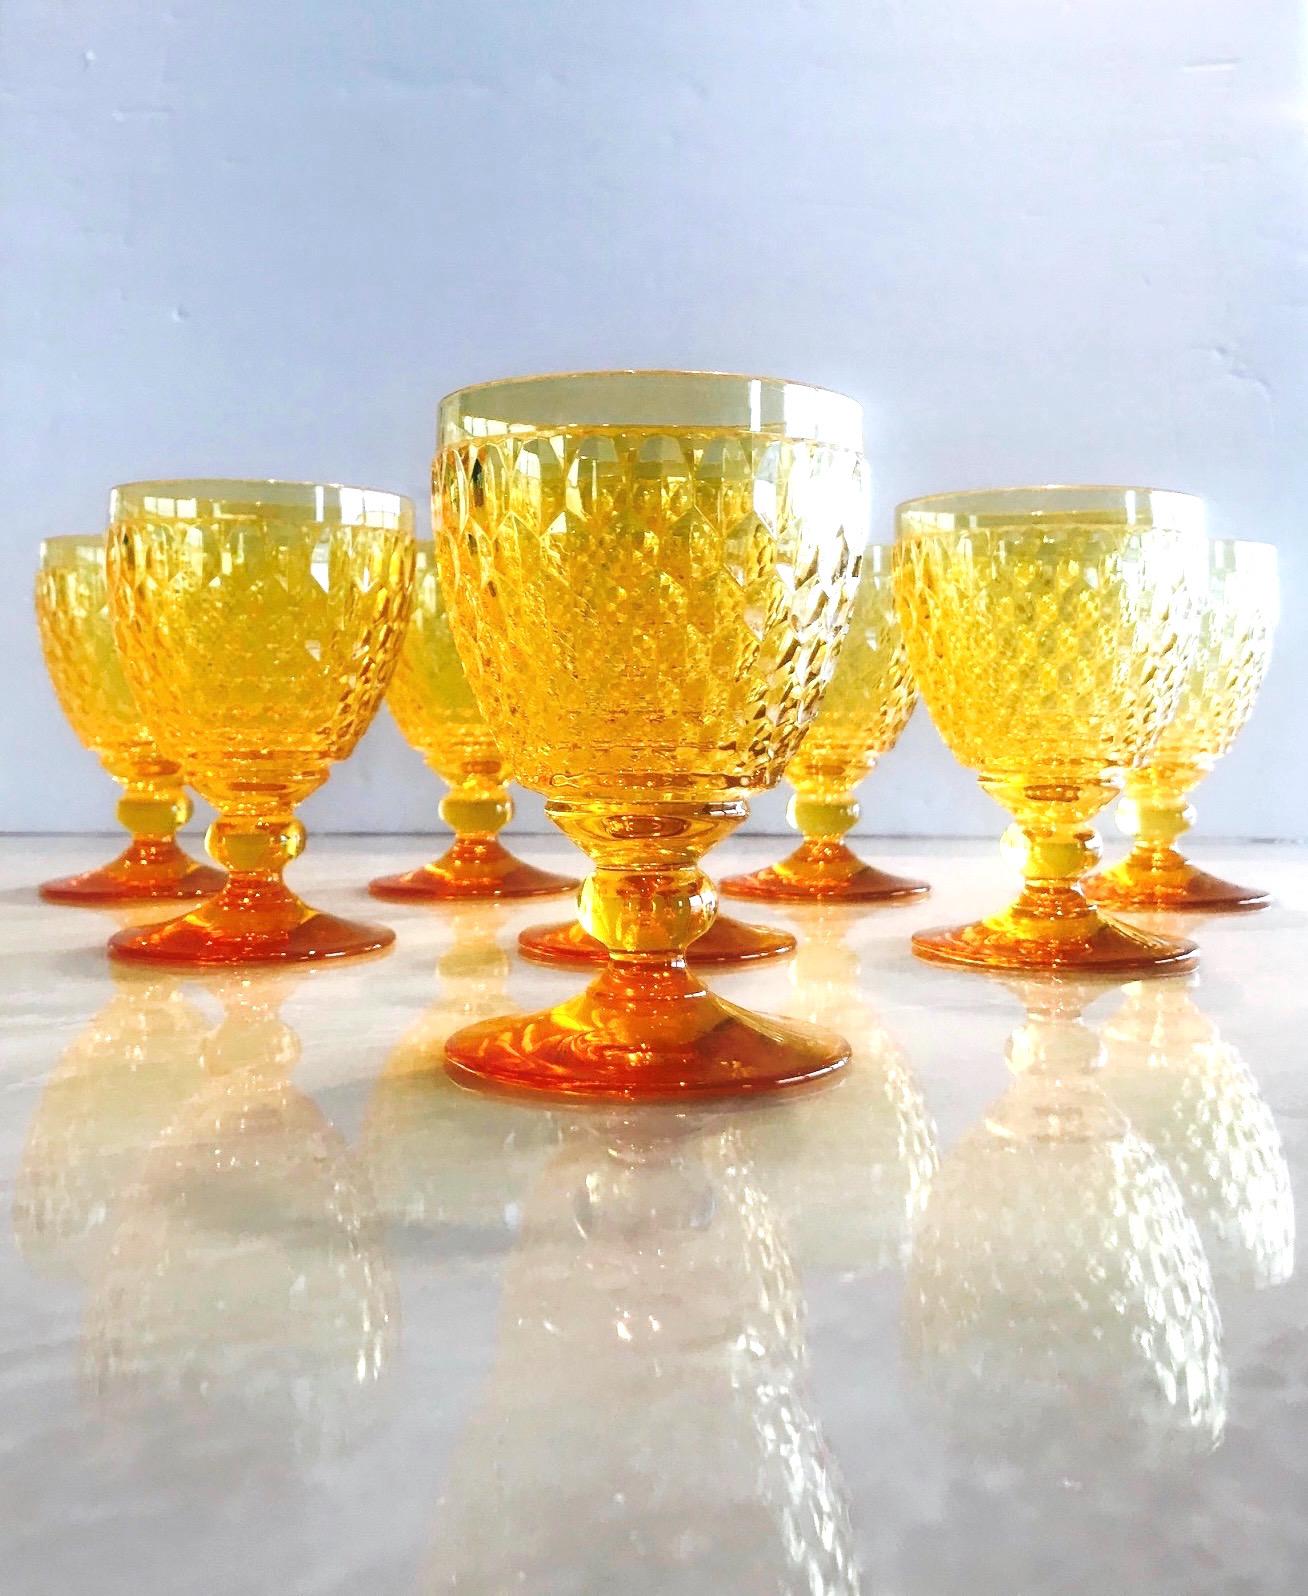 Set of eight luxury crystal claret wine glasses from Villeroy & Boch's Boston series. The stemware glasses are comprised of hobnail crystal with Classic diamond patterns and deliberate short stems. In gorgeous amber colored crystal, making them a